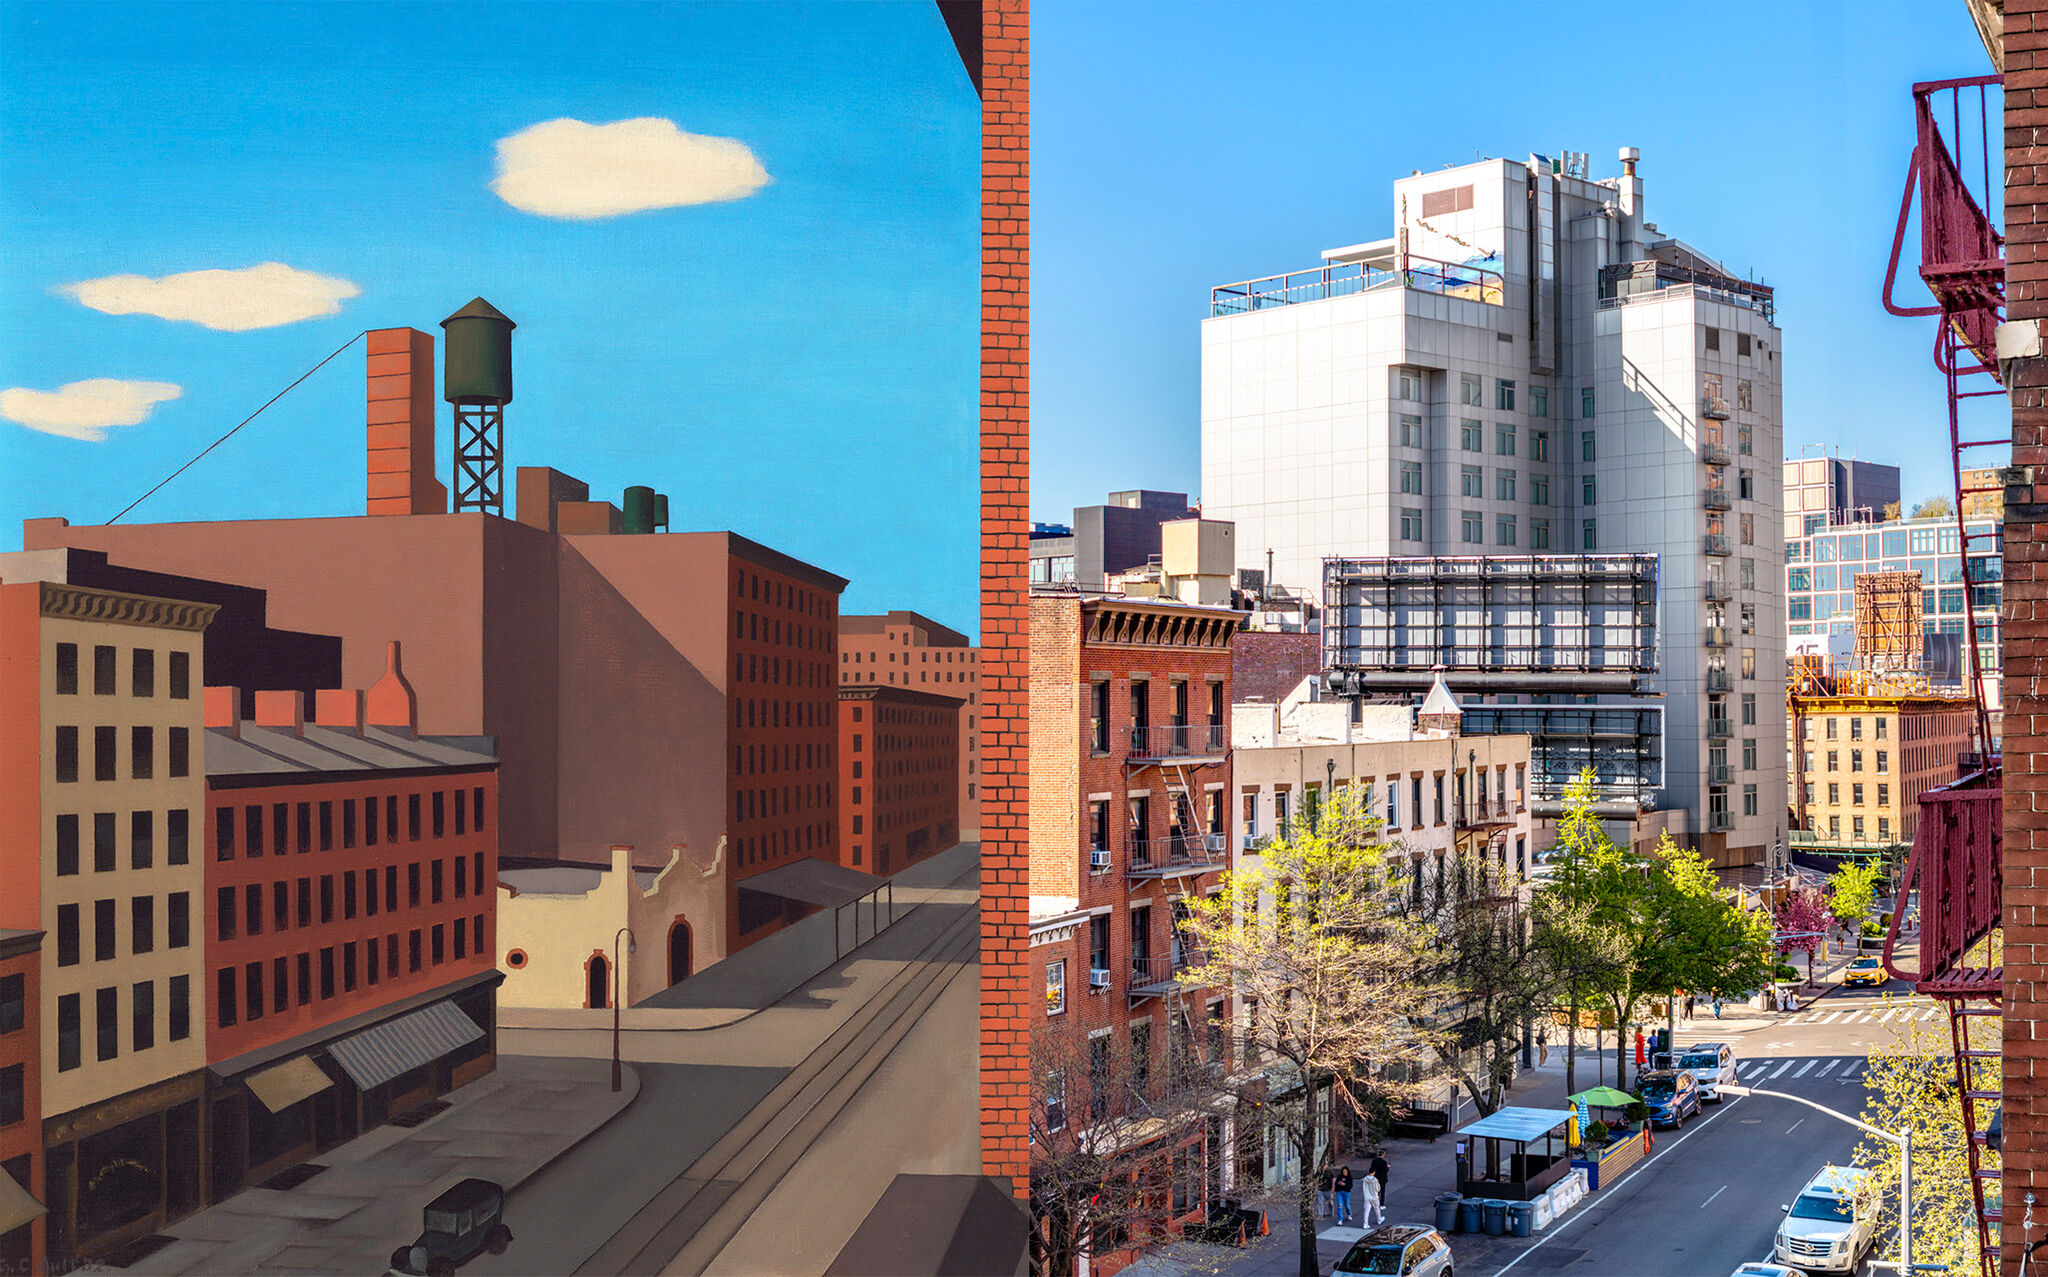 Split view of a stylized painting of urban buildings on the left and a real urban street scene on the right.